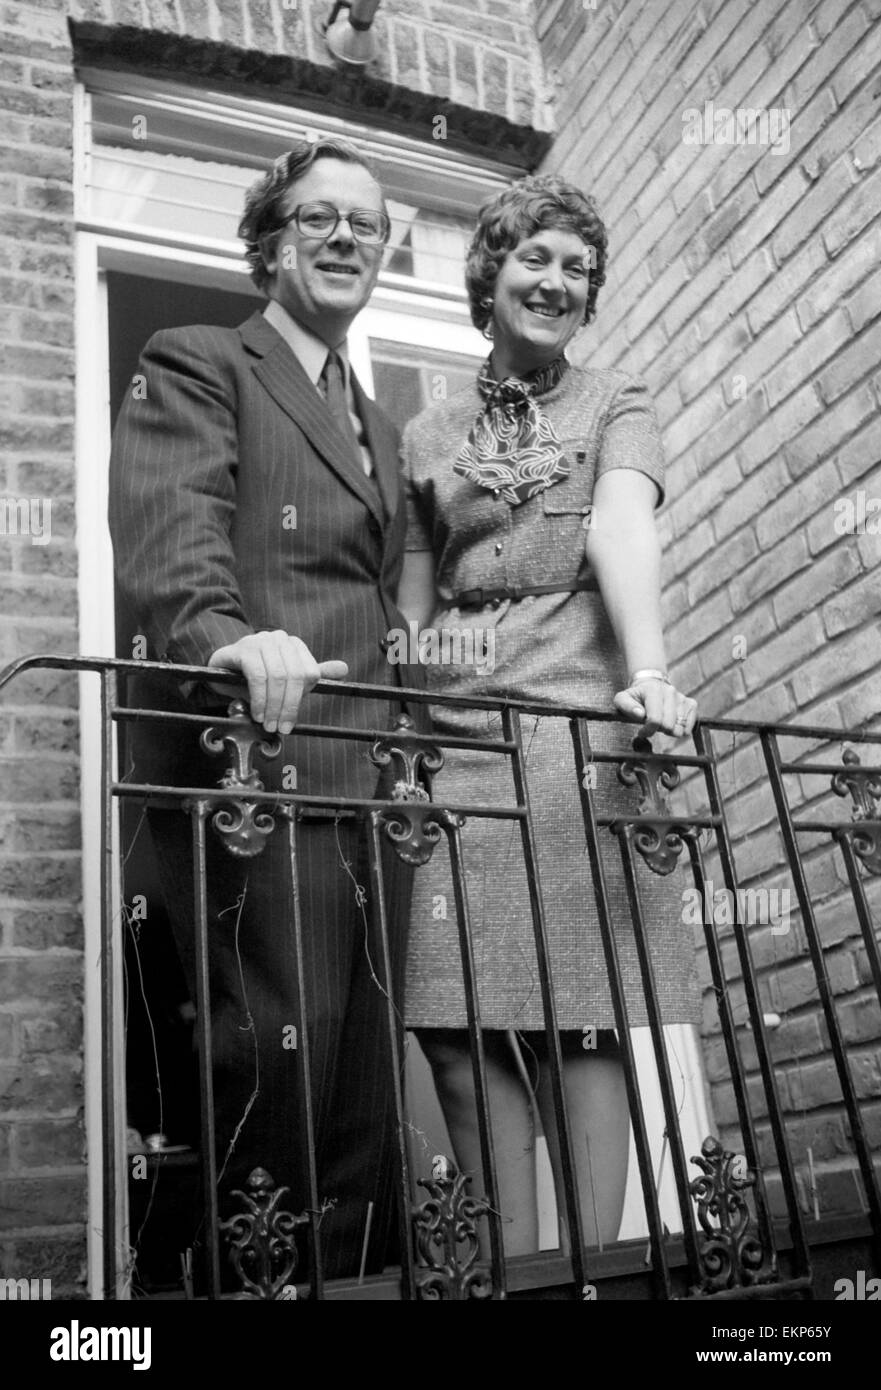 Tory party Leadership Contestants. Sir Geoffrey and Lady Howe at their home in S.W. London. February 1975 75-0725-001 Stock Photo